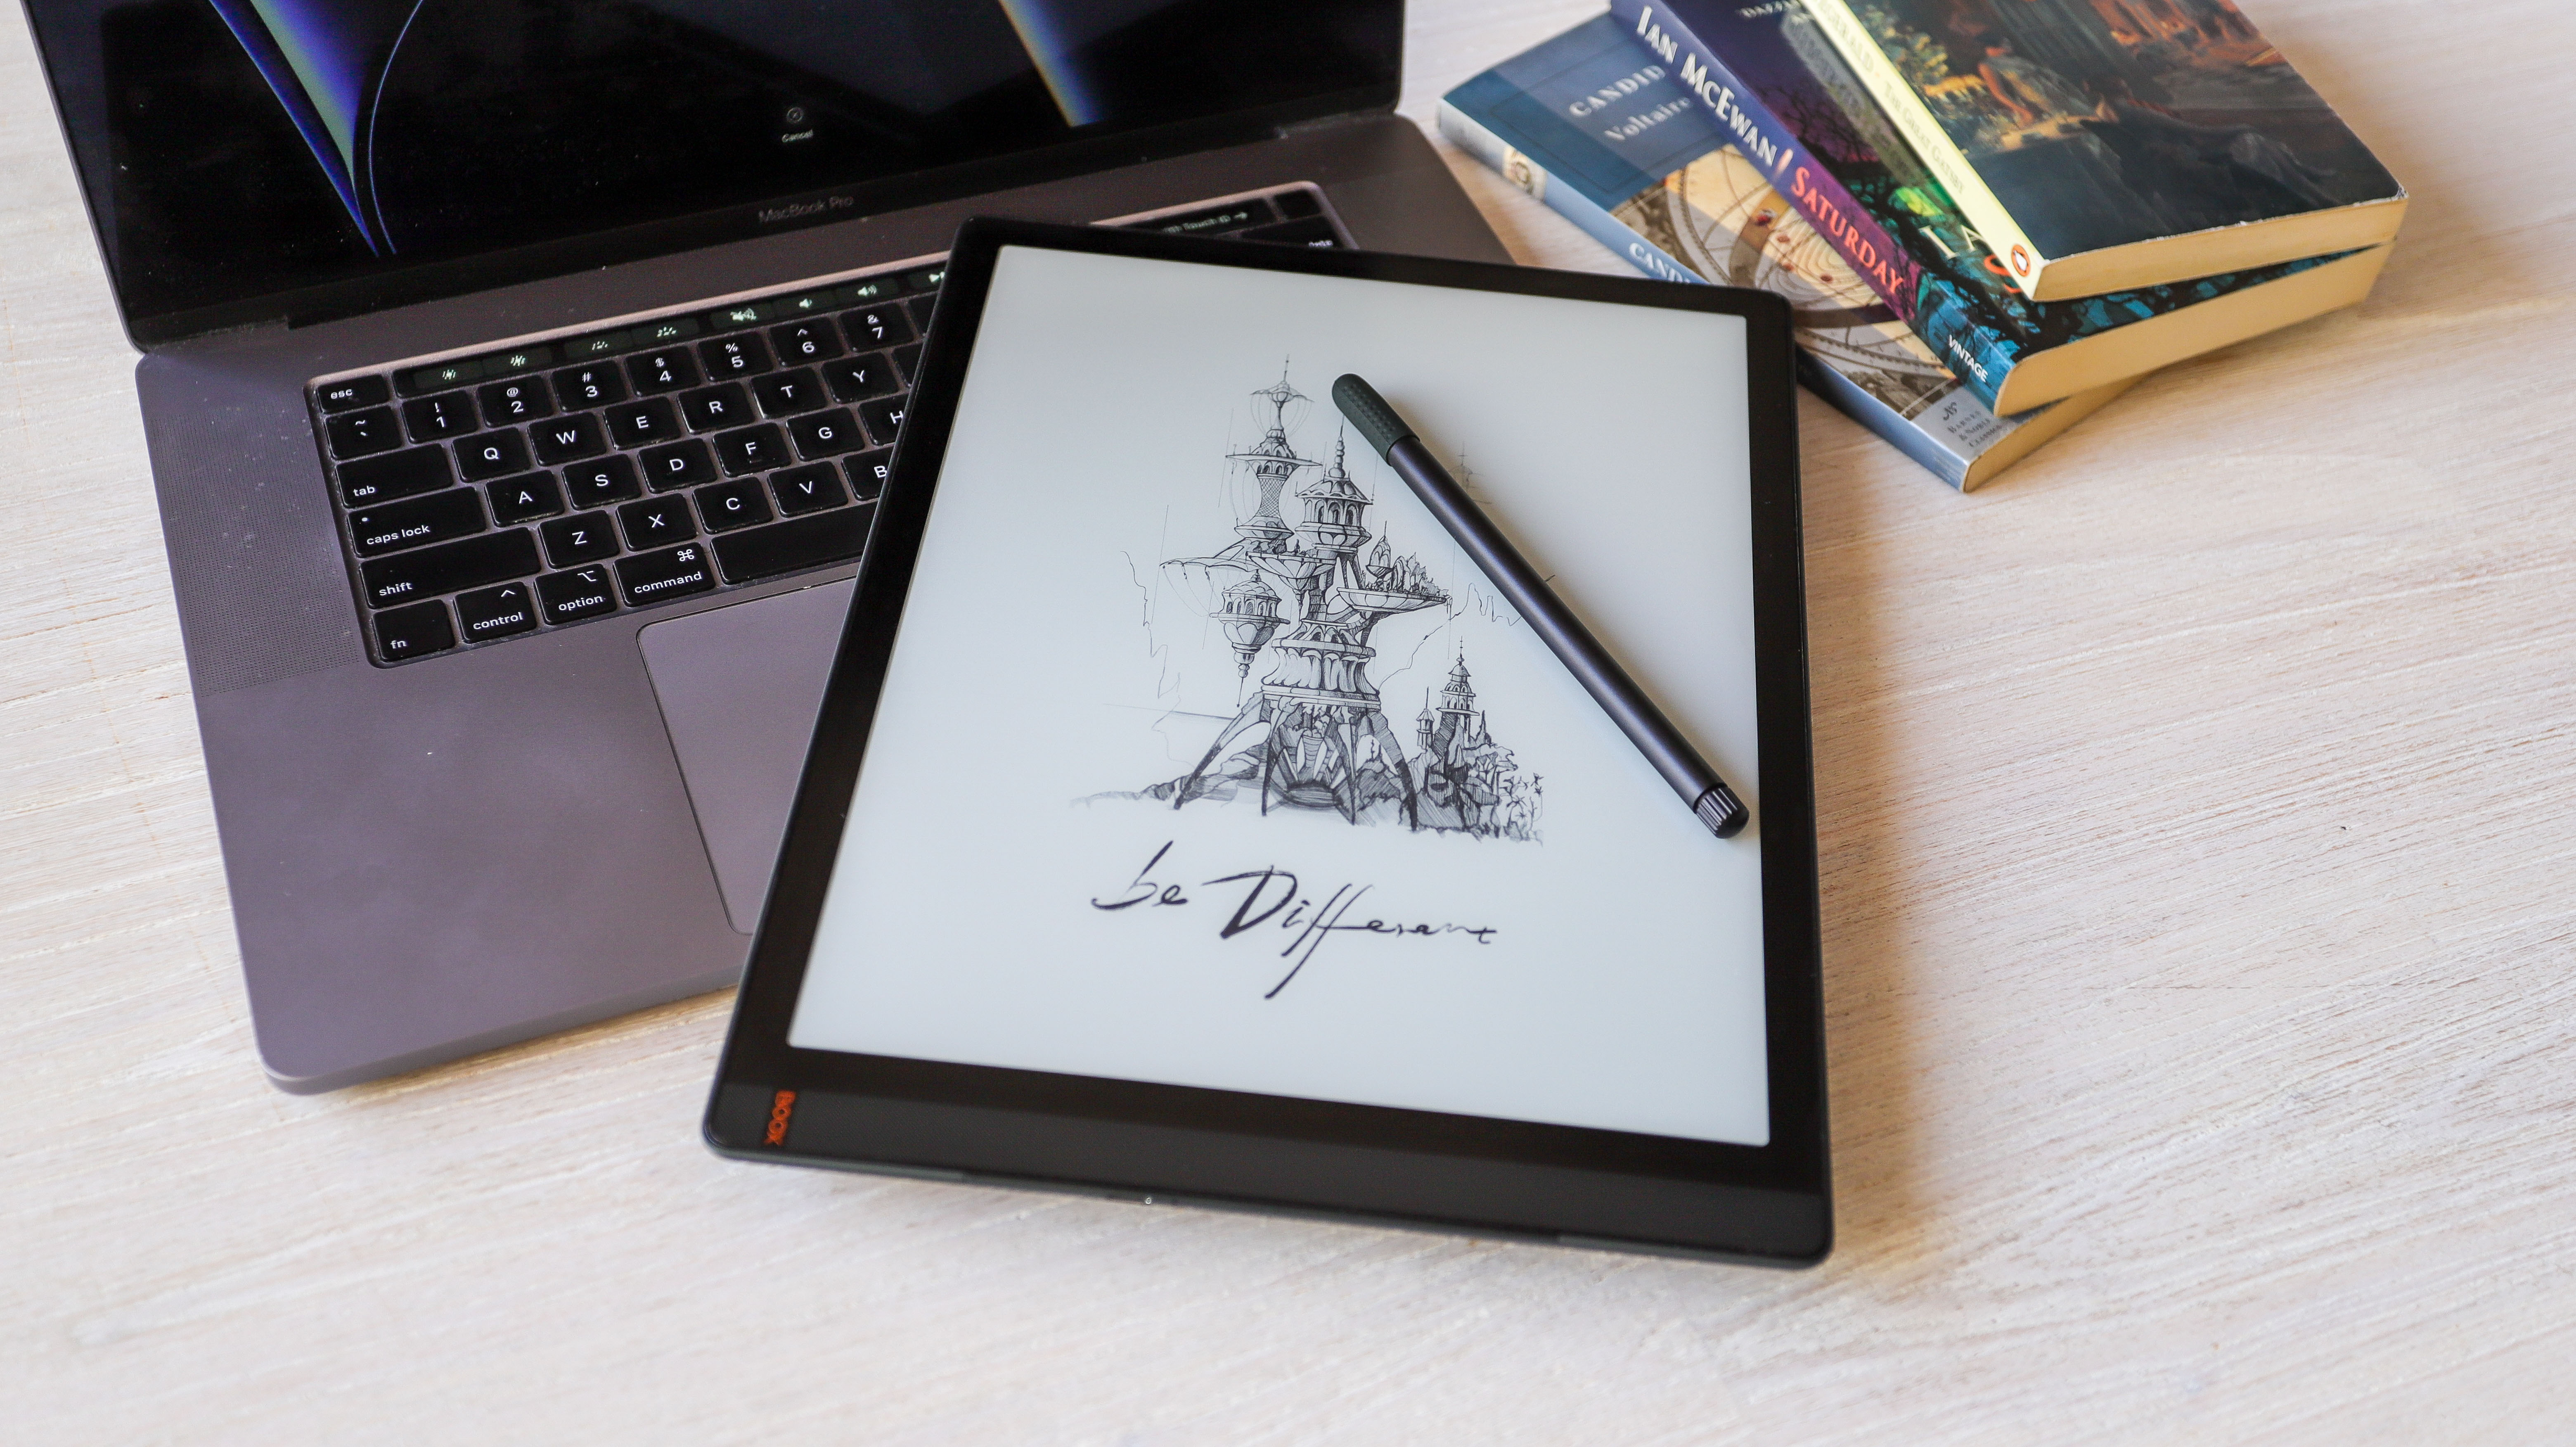 Hands on Review of the Onyx Boox Tab X - Good e-Reader